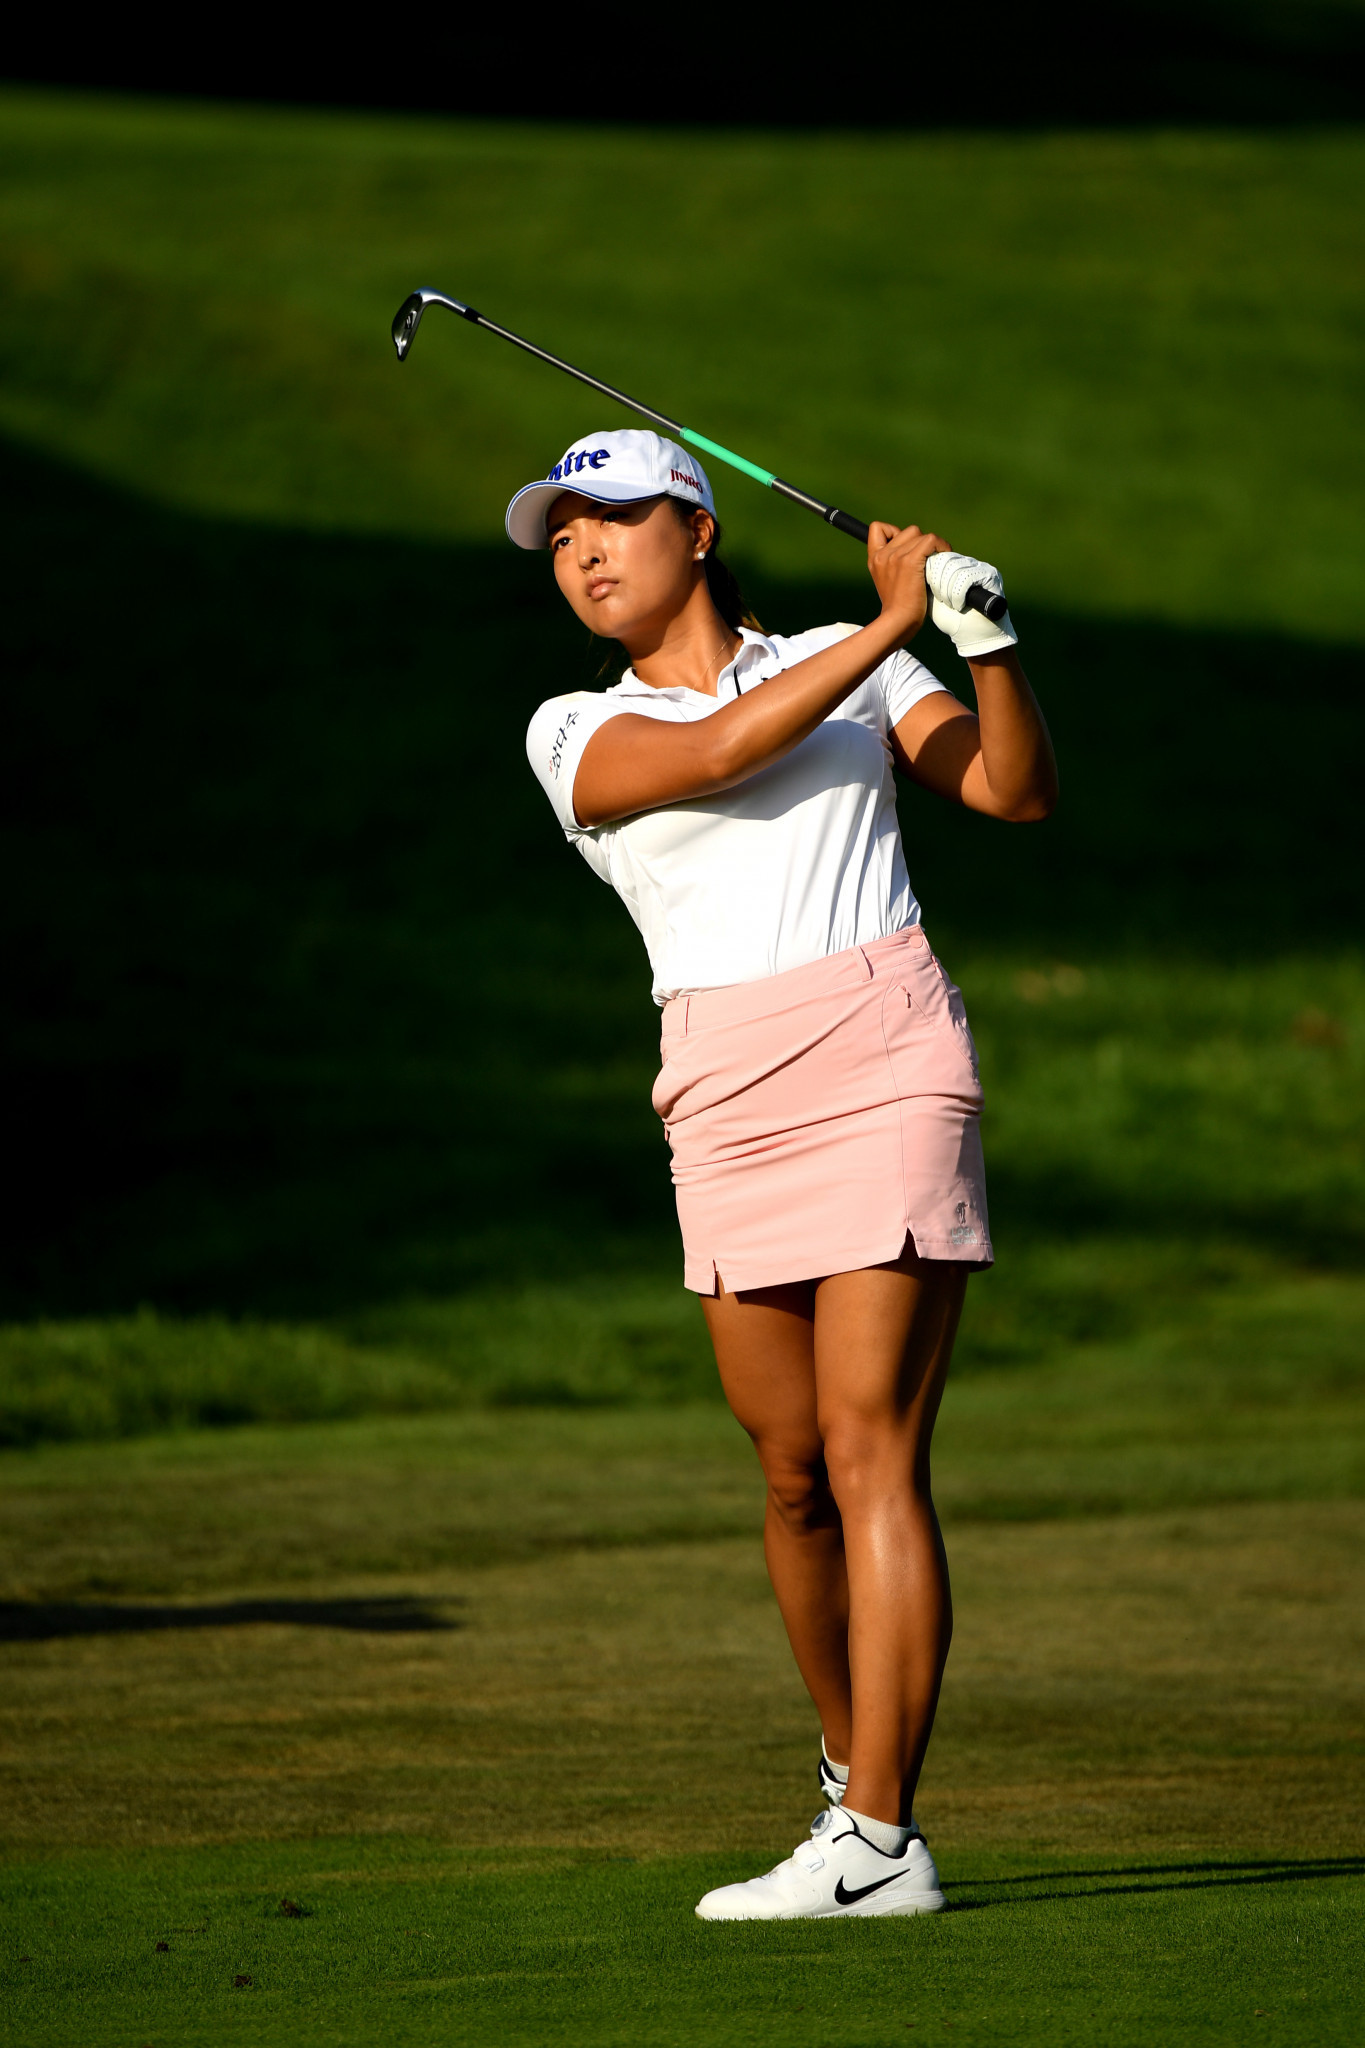 South Korea's world number two Ko Jin-young is one shot off the lead after today's first round of the Evian Championship in France, the fourth major on the women's tour ©Getty Images